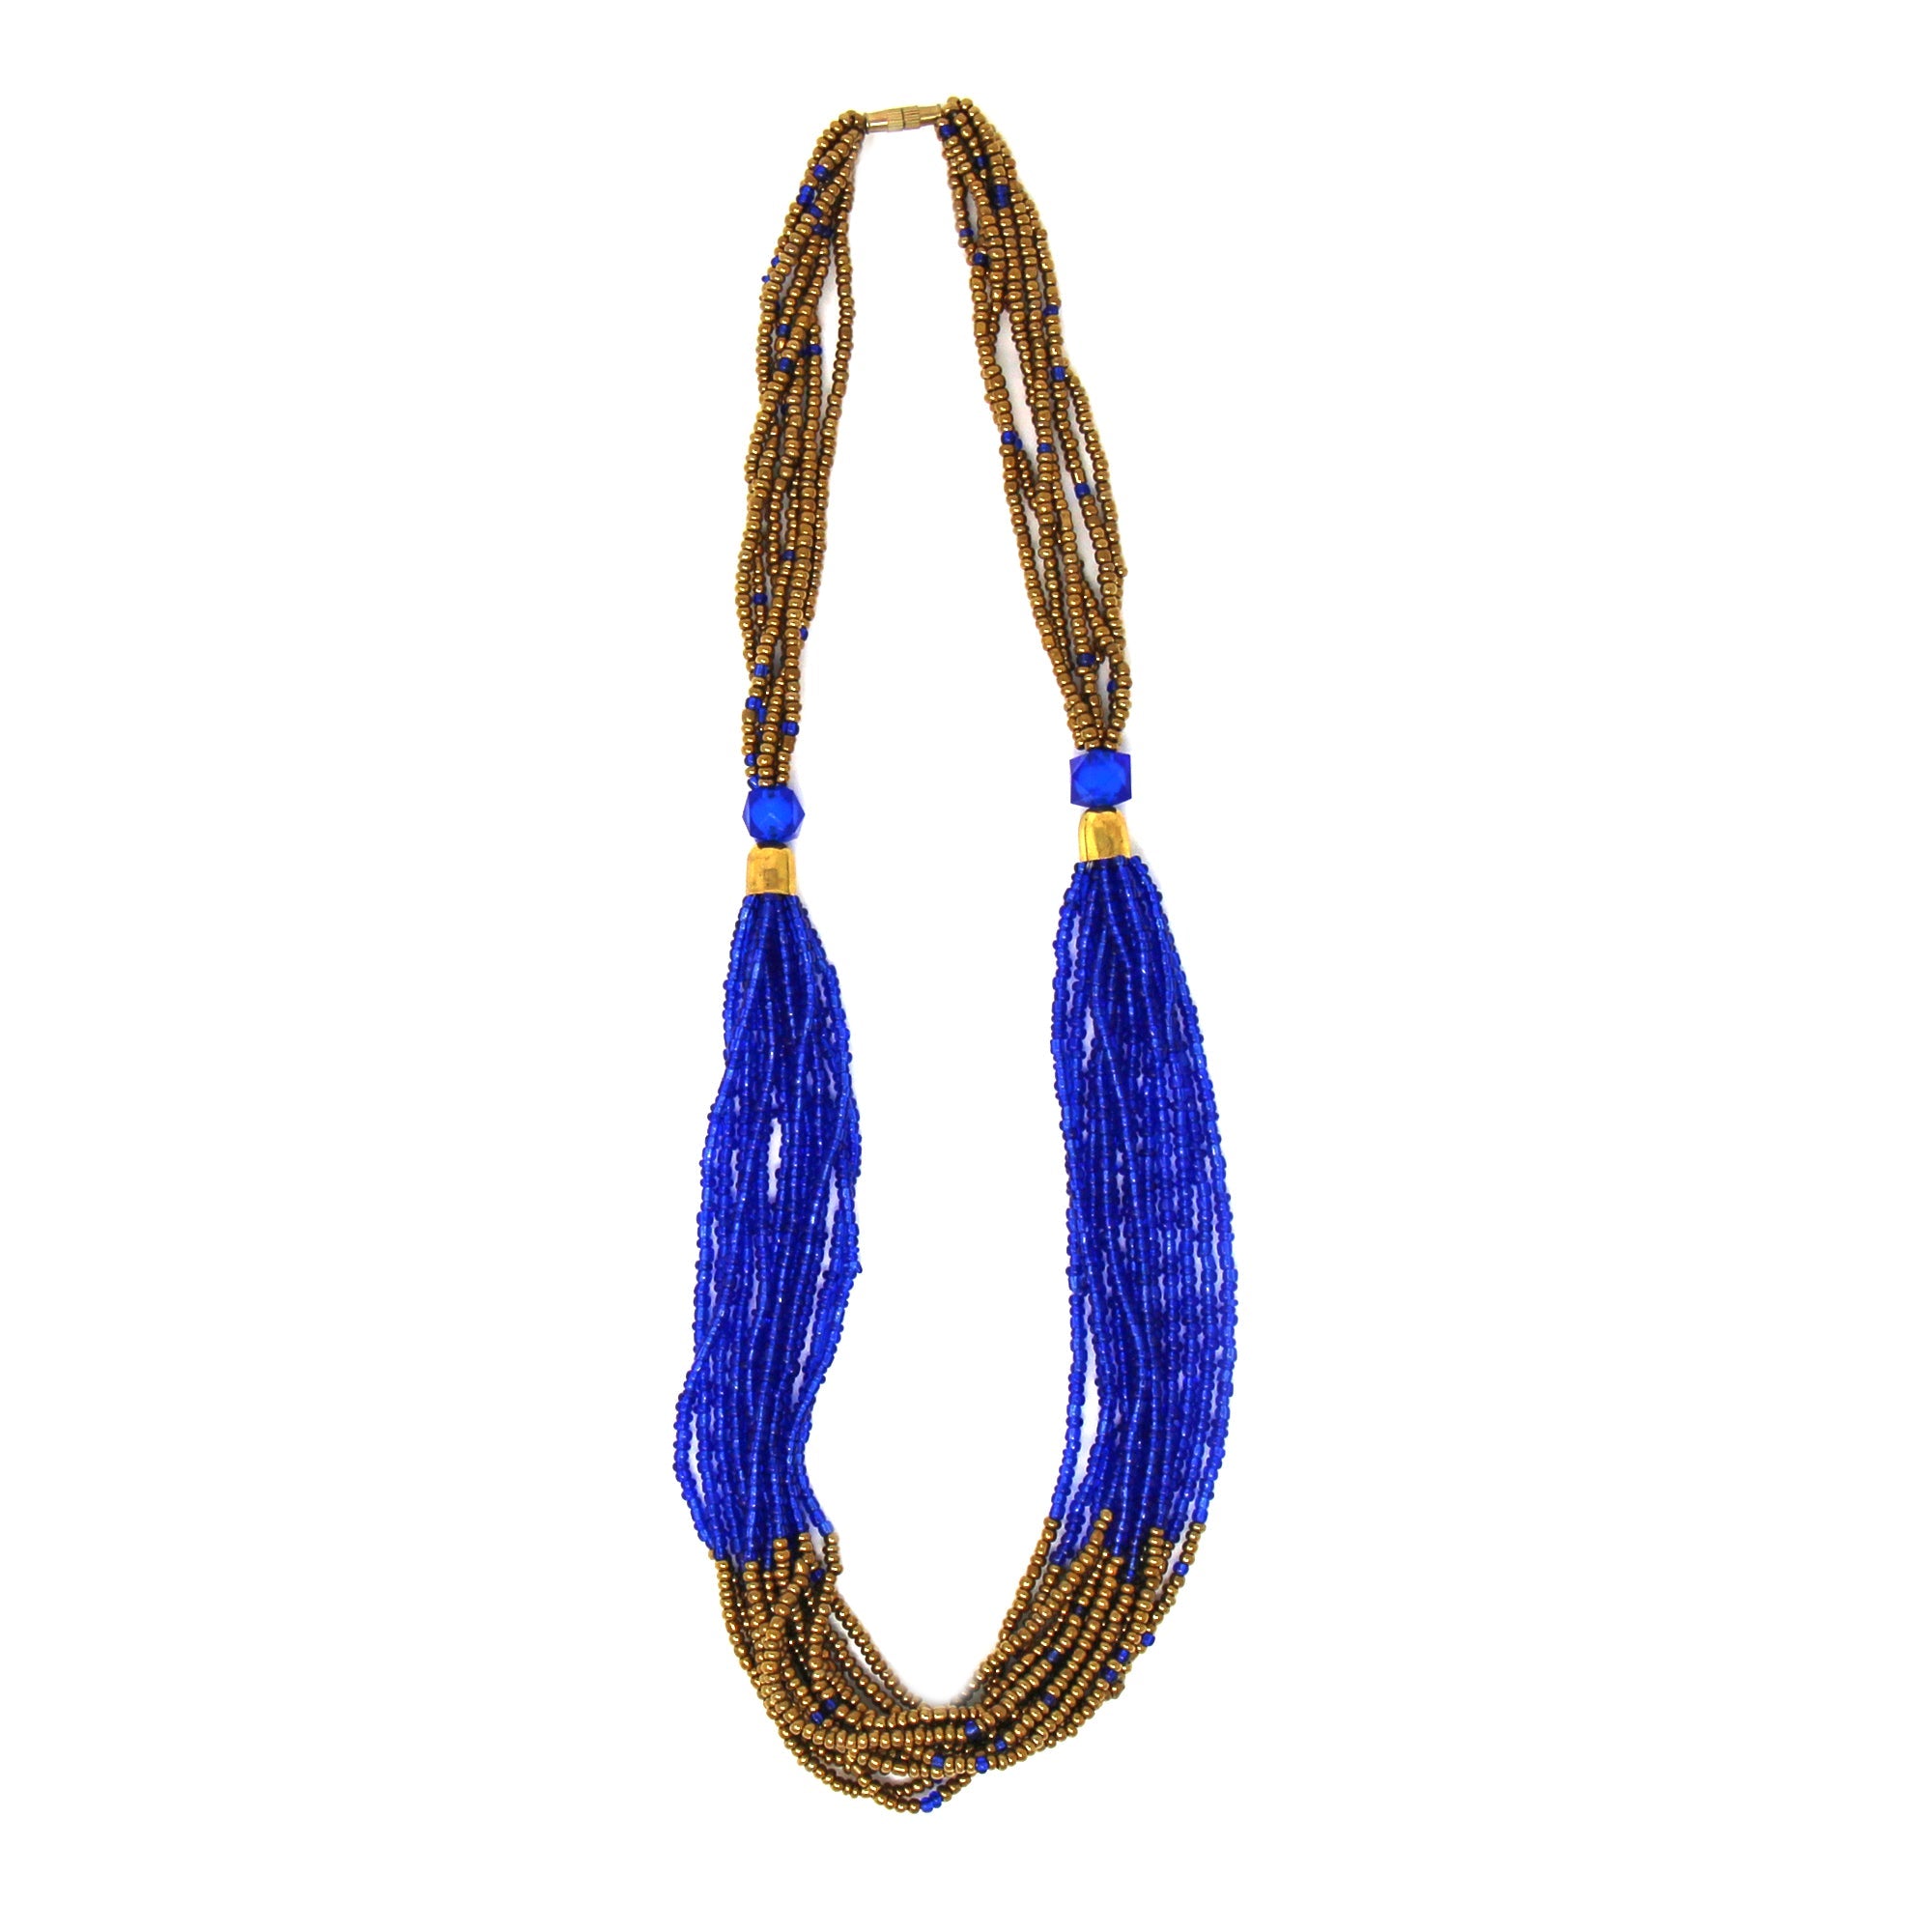 Multistrand Maasai Bead Necklace, Lapis Blue and Gold